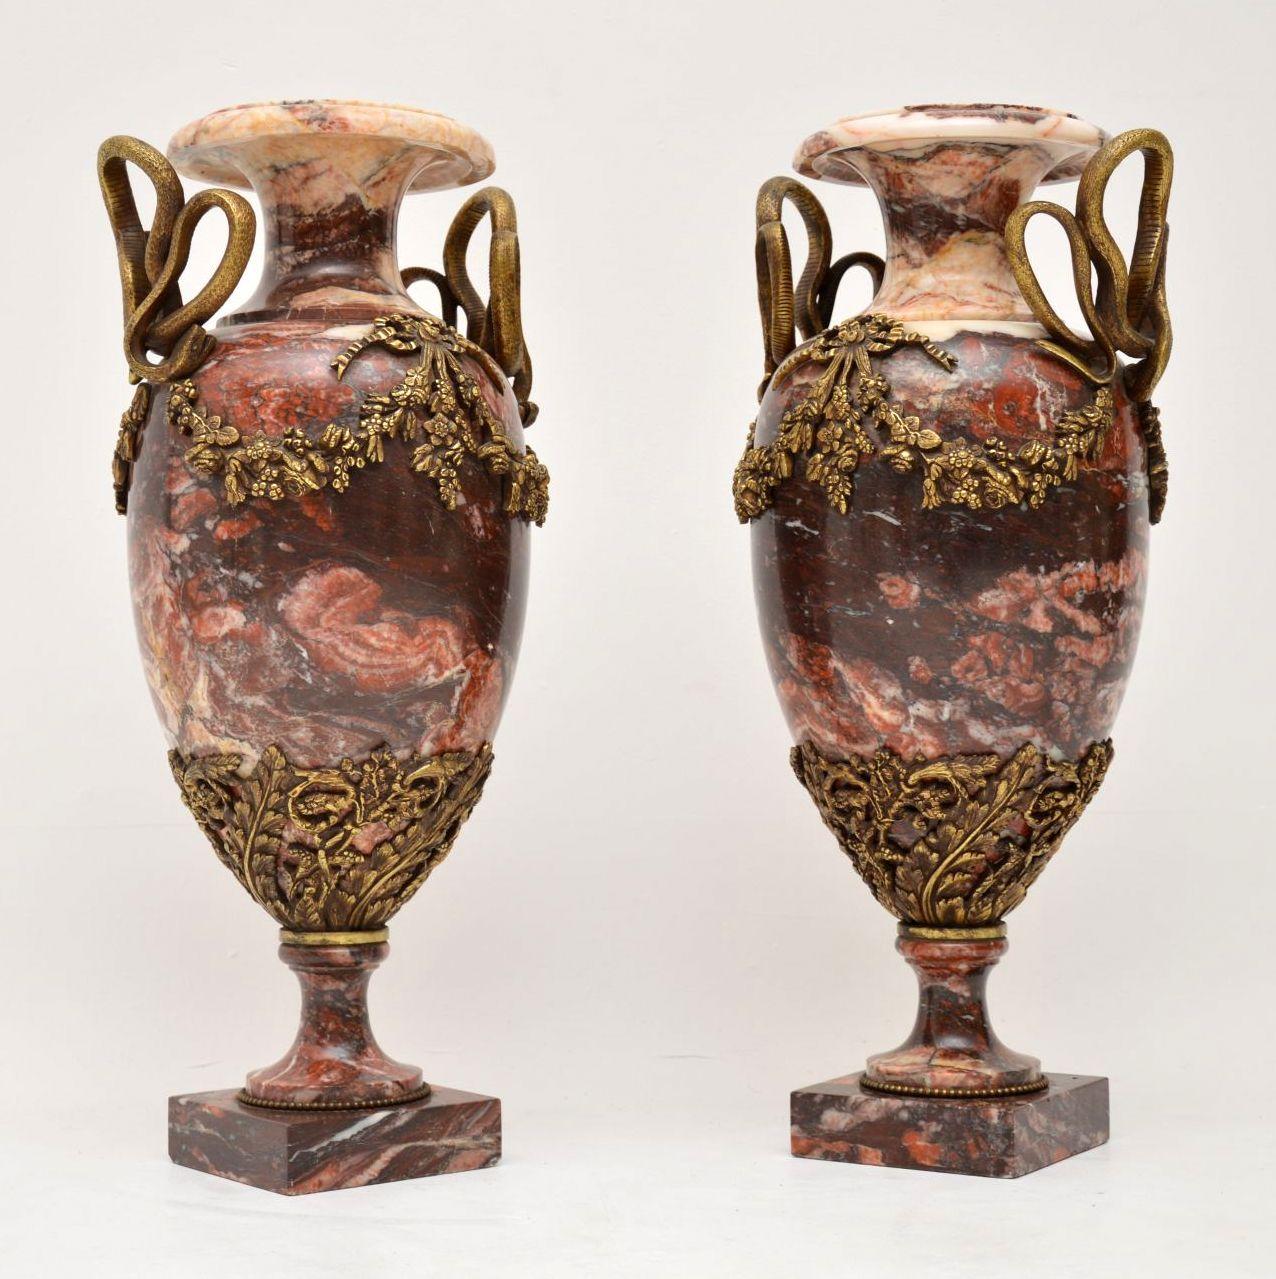 Very large impressive pair of 19th century antique rouge marble urns dating from circa 1860s period, give or take 20 years. They are in good condition with some slight damage which we have tried to show in the images, so please enlarge all the